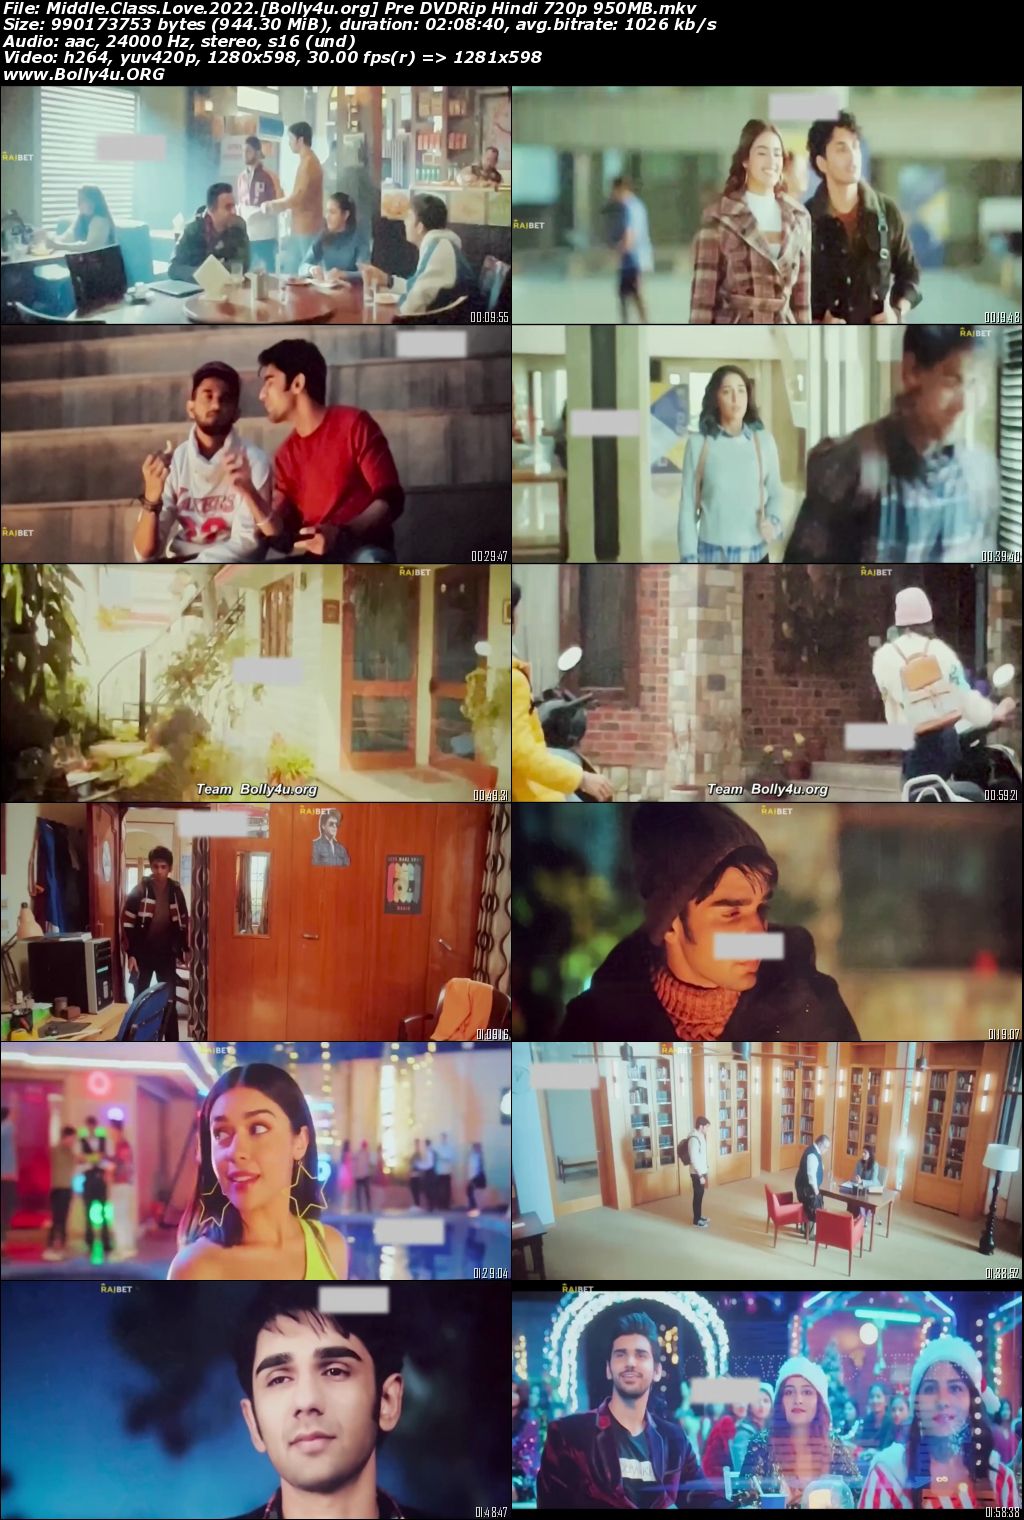 Middle Class Love 2022 Pre DVDRip Hindi Full Movie Download 720p 480p